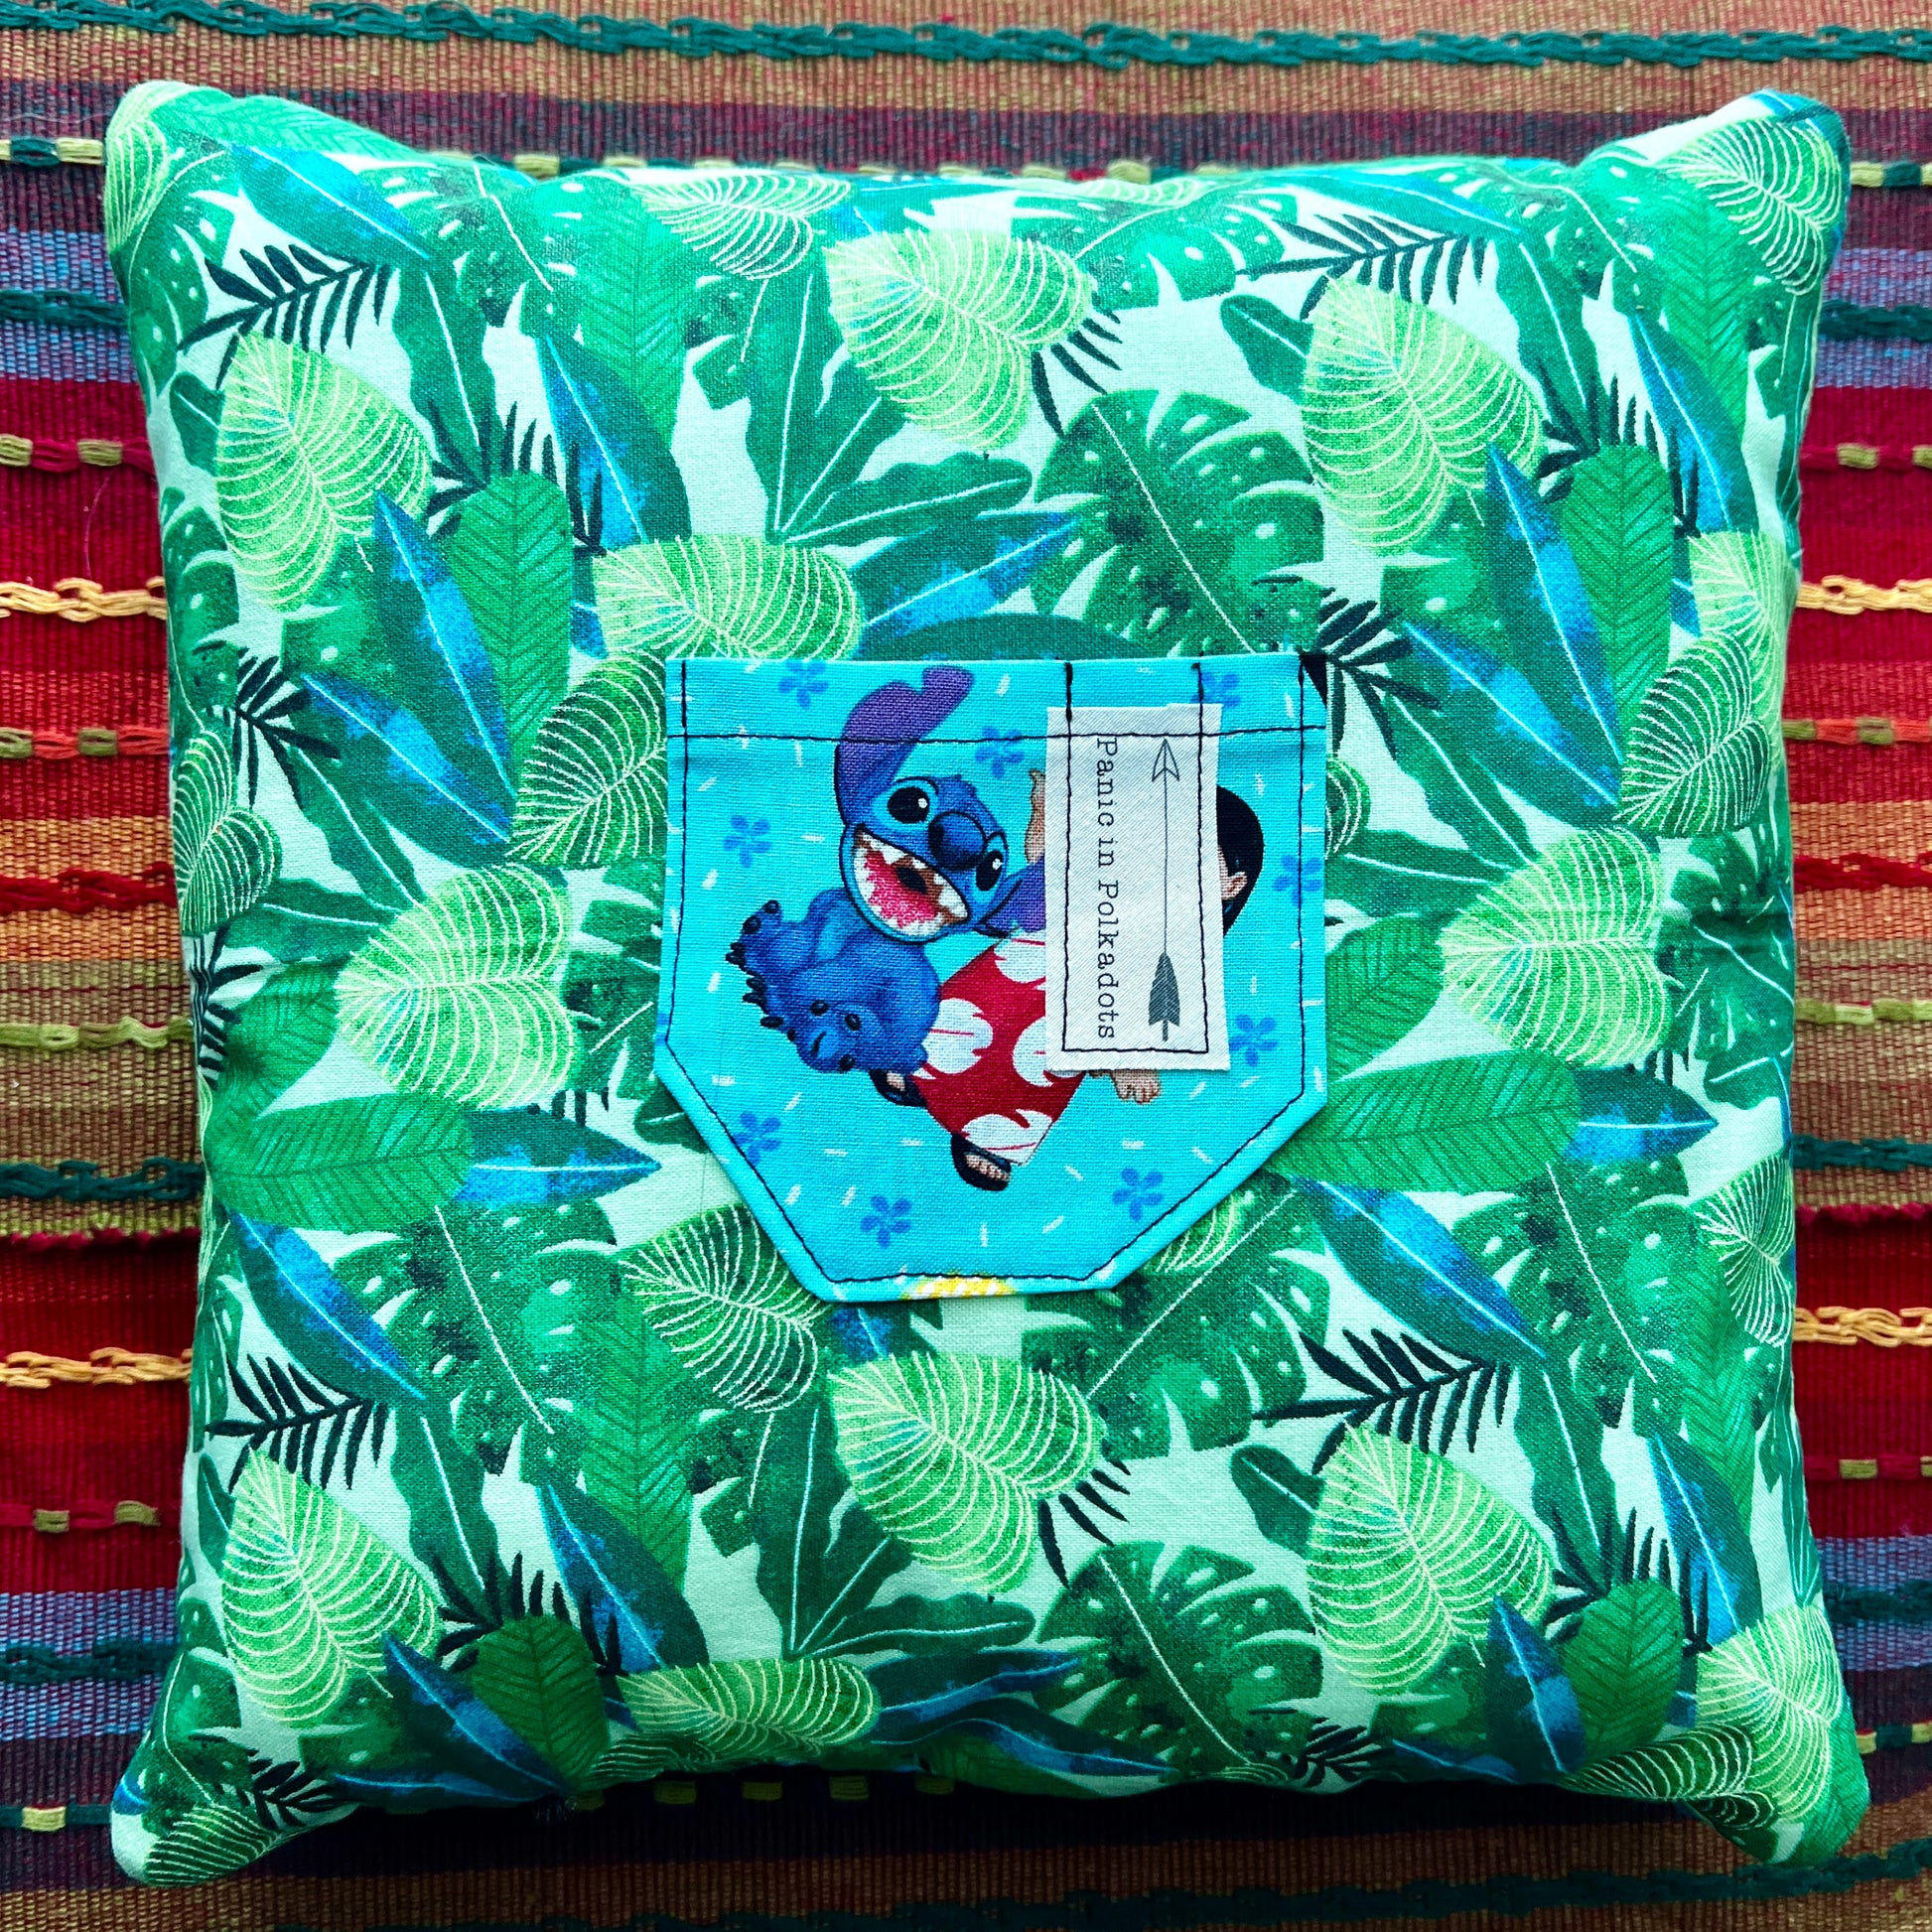 back view of lilo and stitch cathedral square pillow, with green leaves and stitch pocket